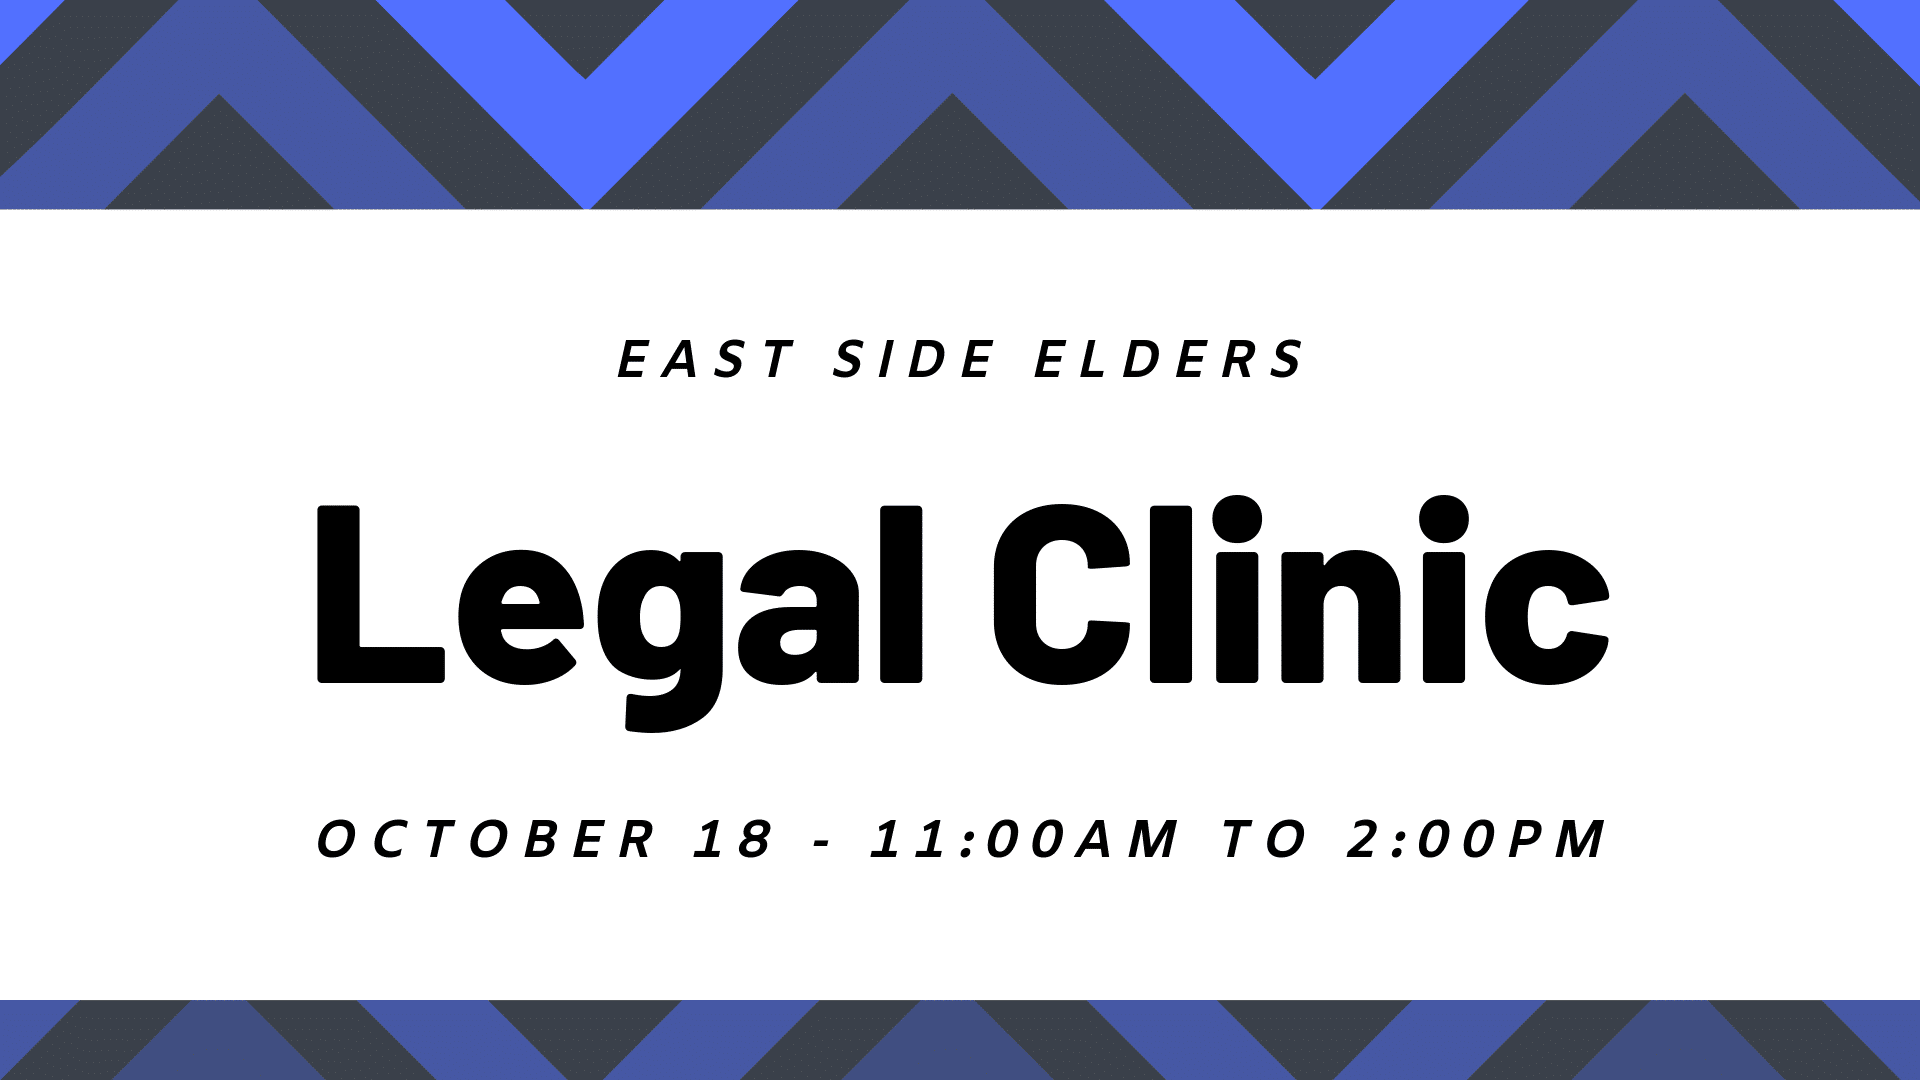 Black and blue geometric border. Text reads: East Side Elders Legal Clinic. October 18 - 11am to 2pm